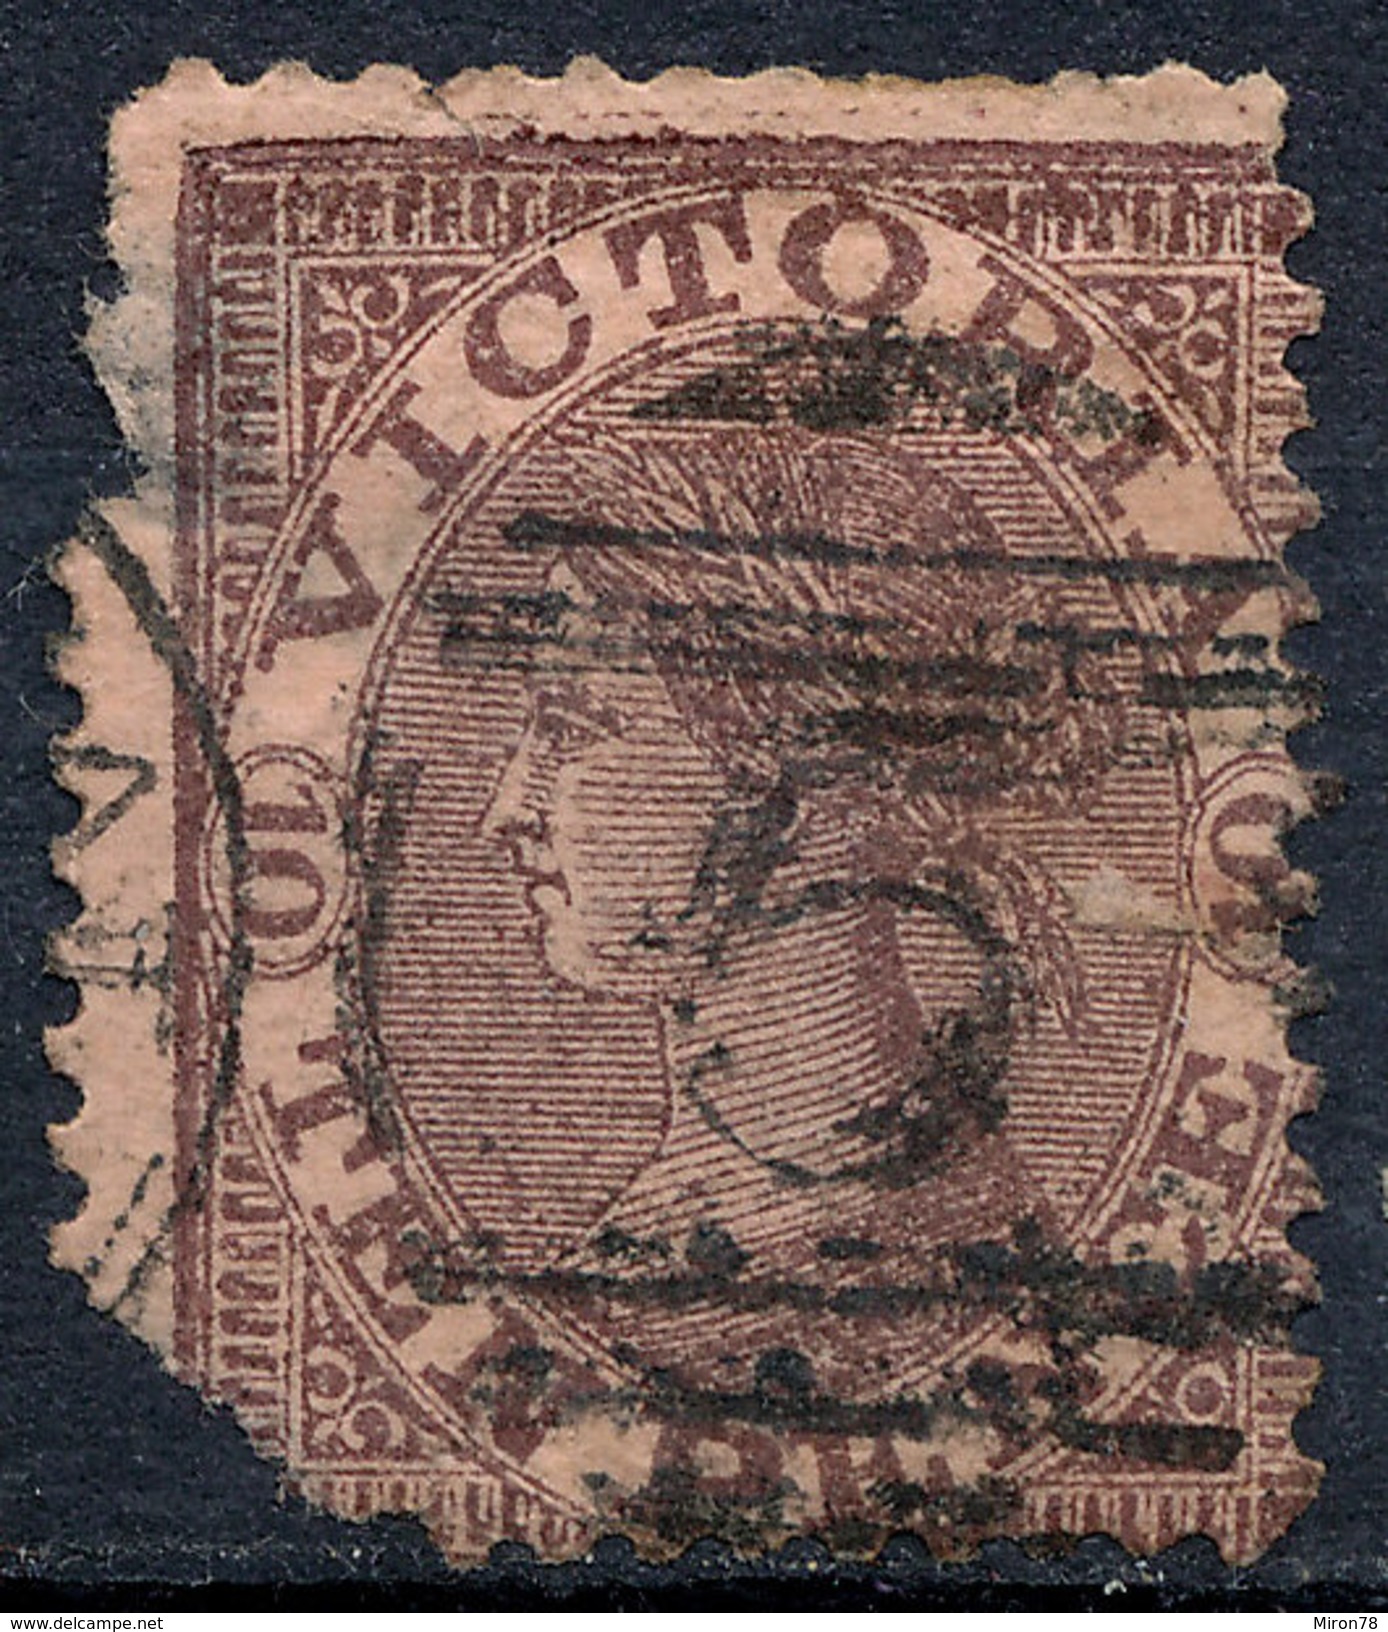 Stamp VICTORIA Queen Victoria Used Lot#5 - Used Stamps